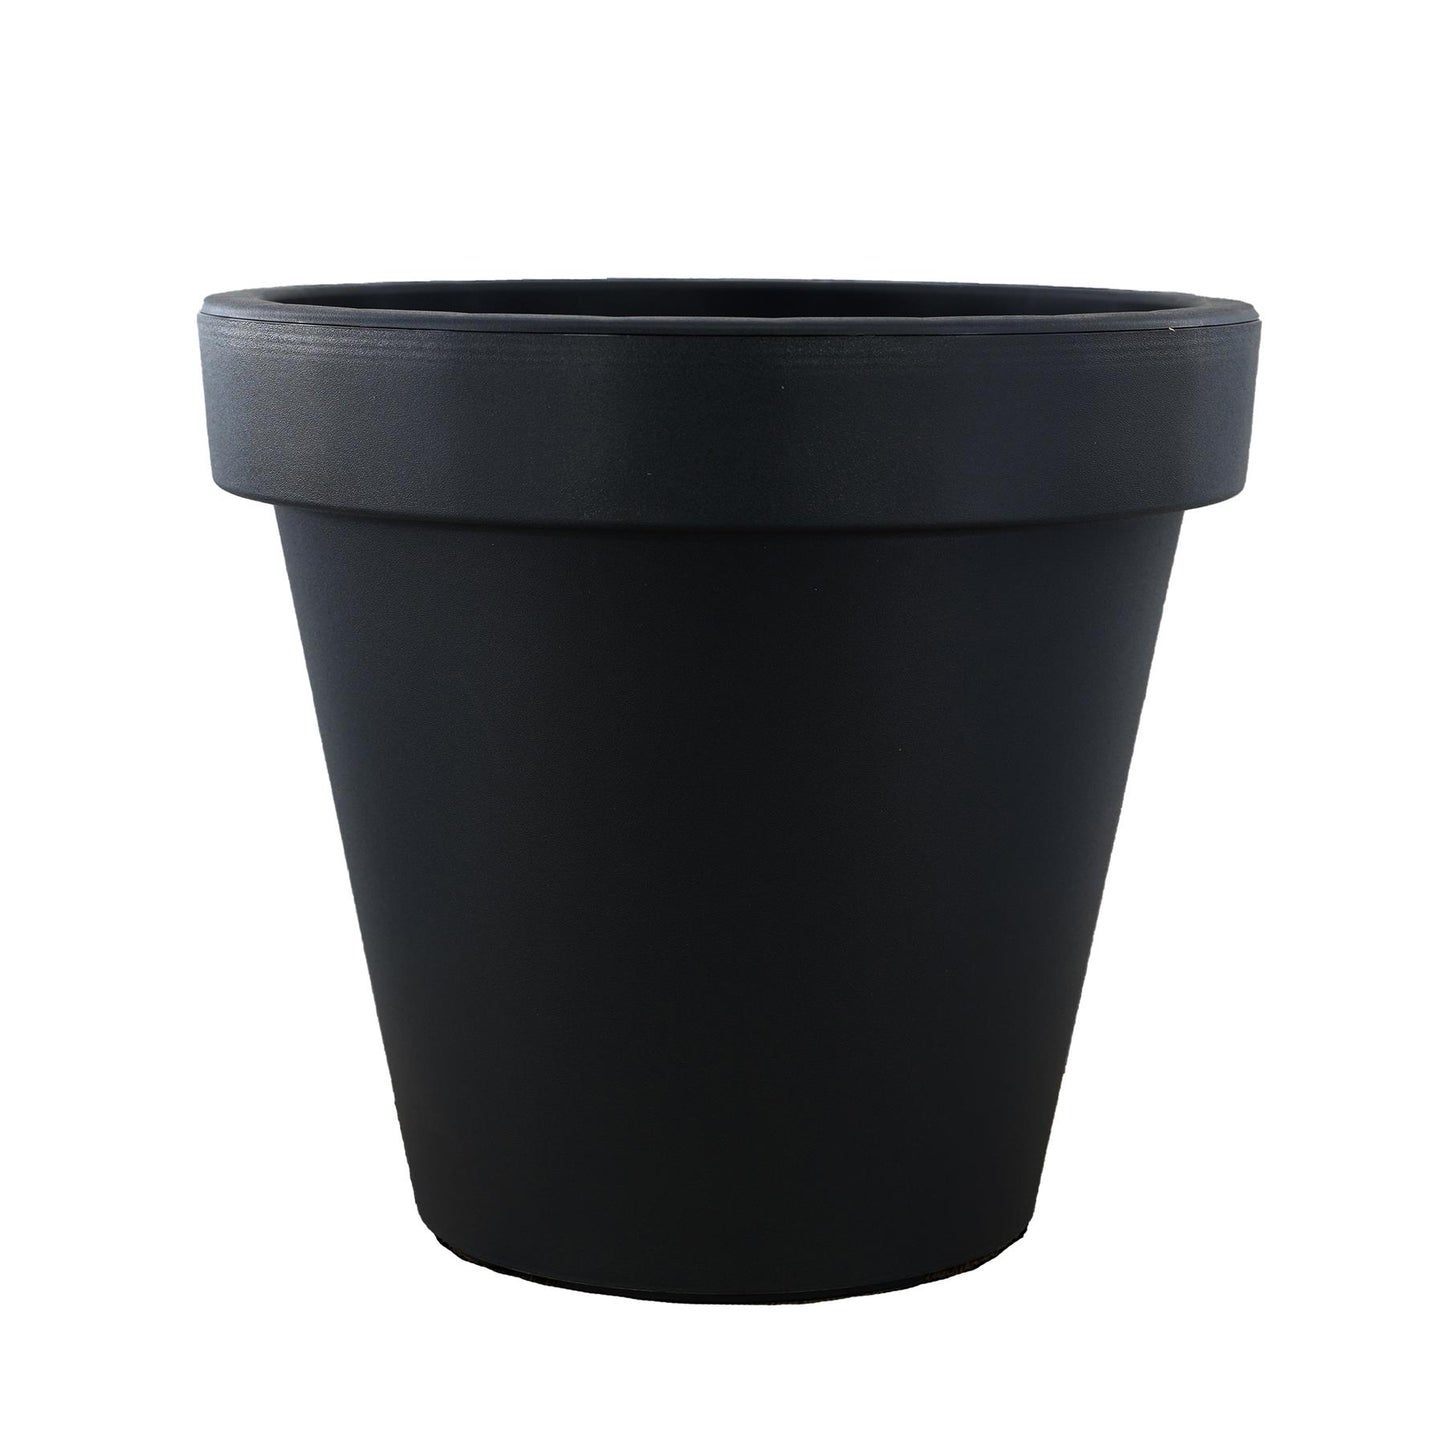 Anthracite Large Flower Pot Planter 35 x 31 cm by Geezy - UKBuyZone